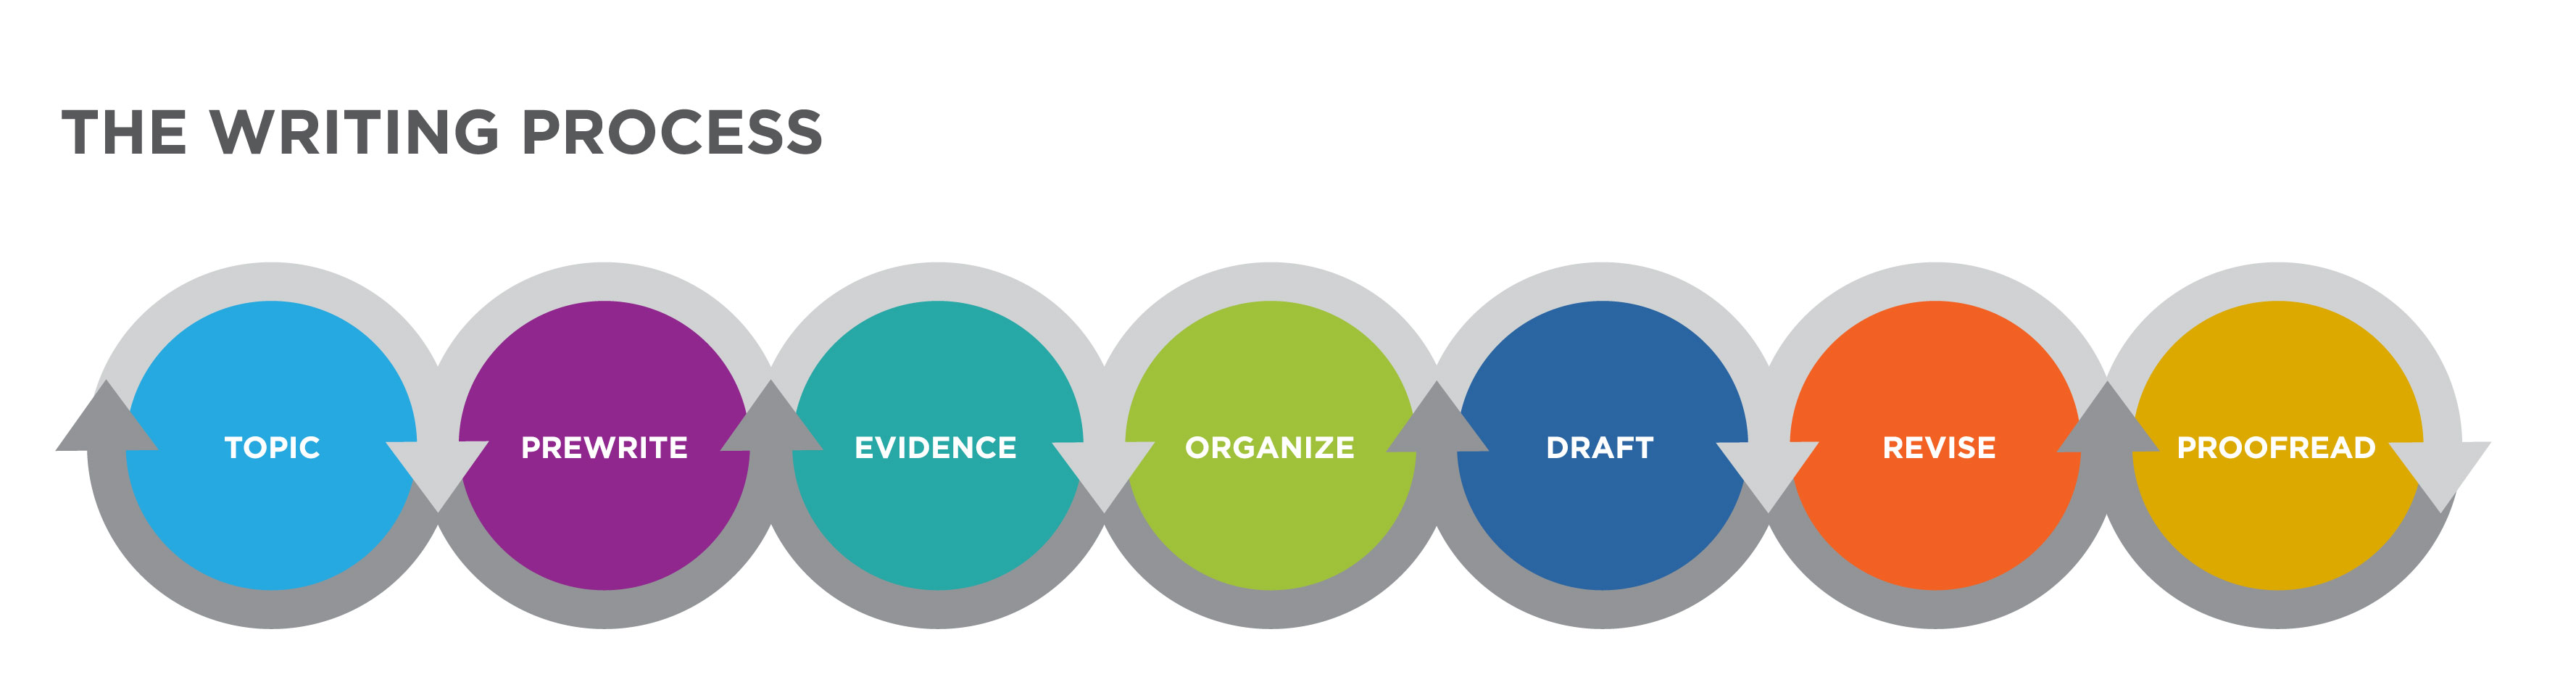 Graphic labeled "The Writing Process." From left to right, it reads: Topic, Prewrite, Evidence, Organize, Draft, Revise, Proofread.